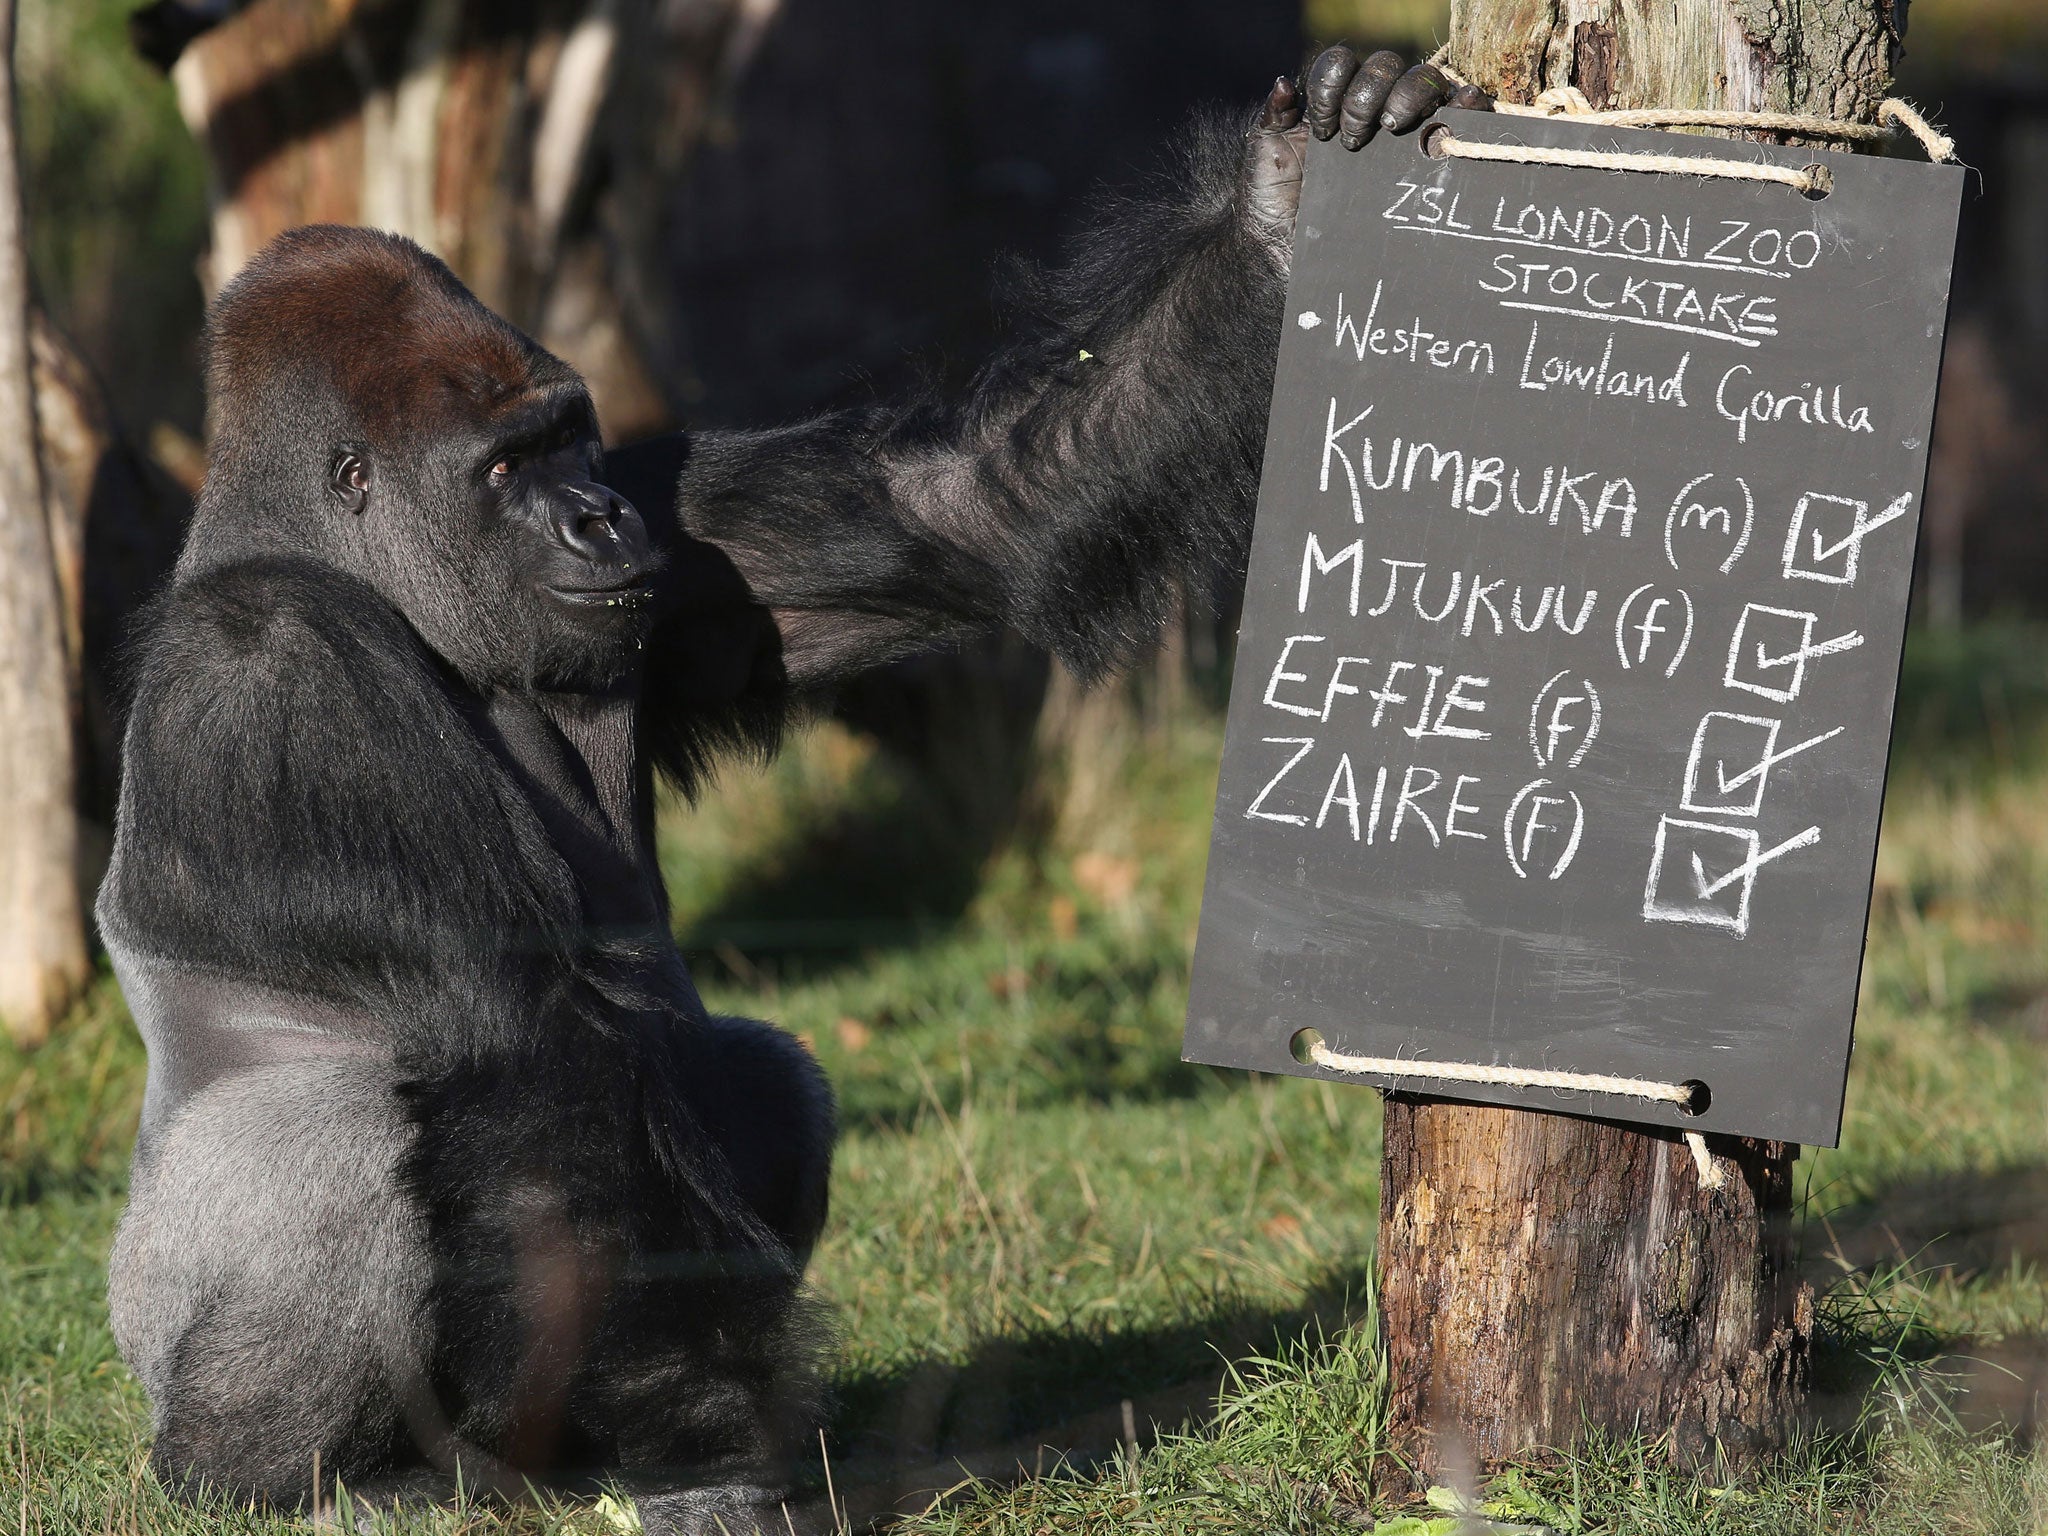 Kumbuka, a Western Lowland gorilla, in his enclosure during ZSL London Zoo's annual stocktake of animals